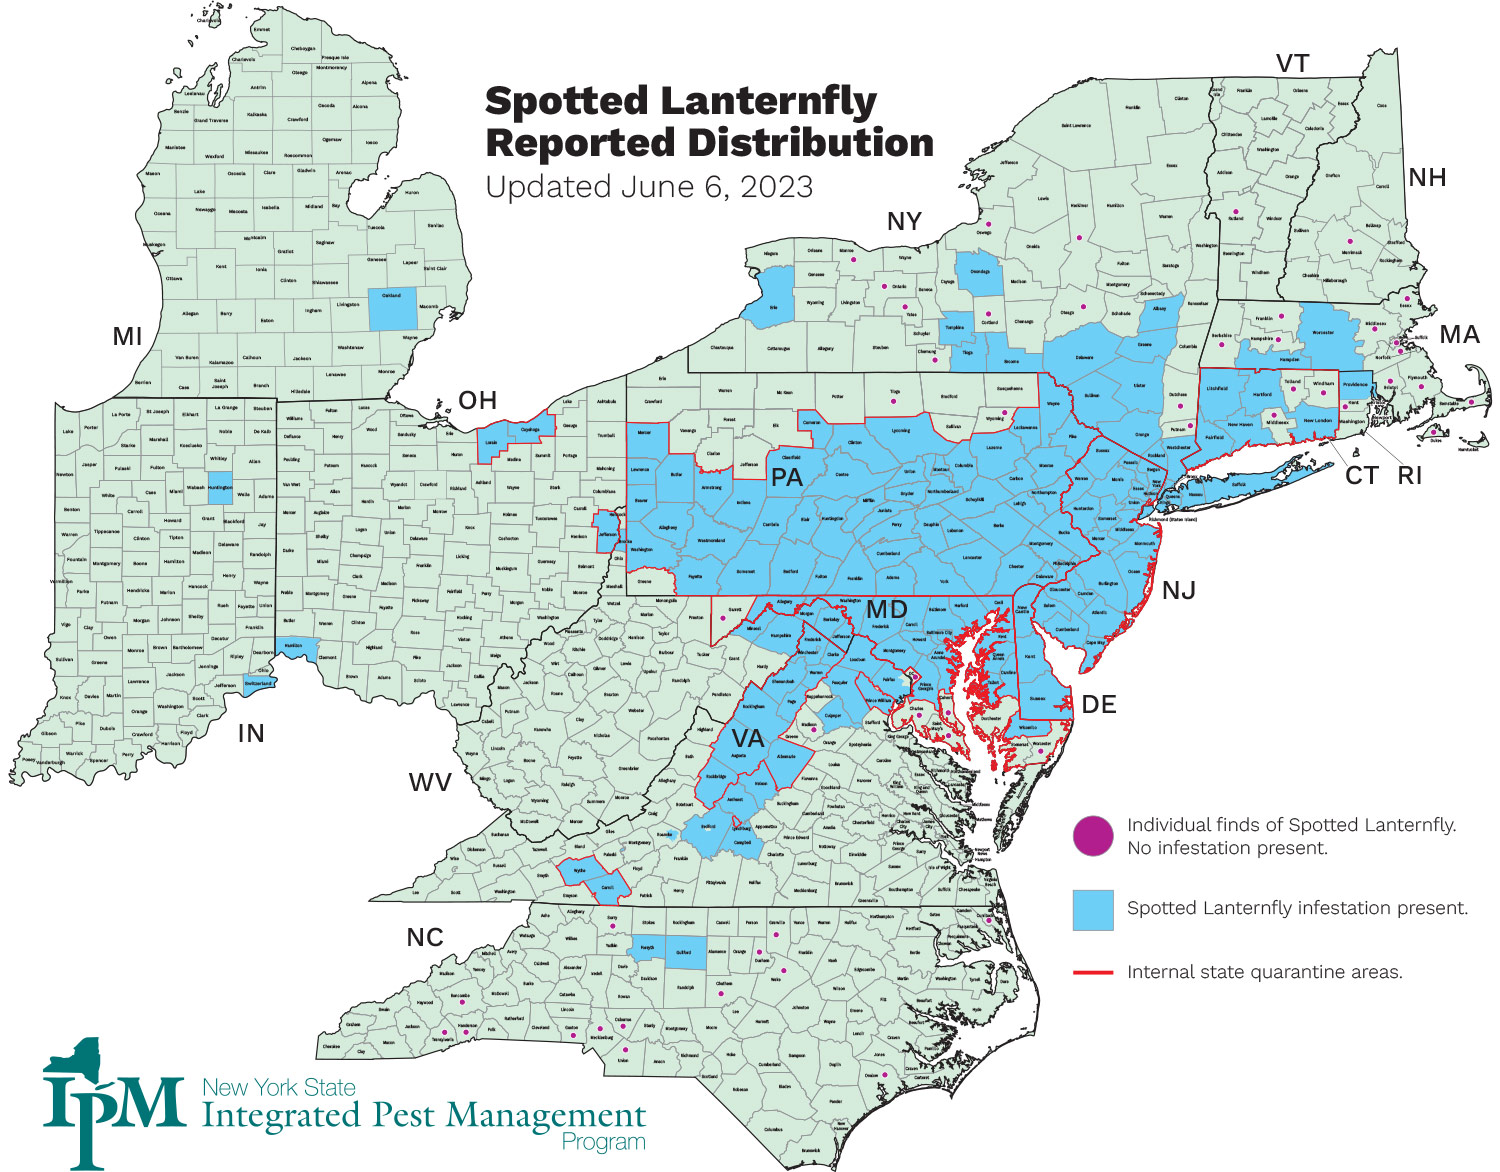 Spotted Lanternfly Reported Distribution